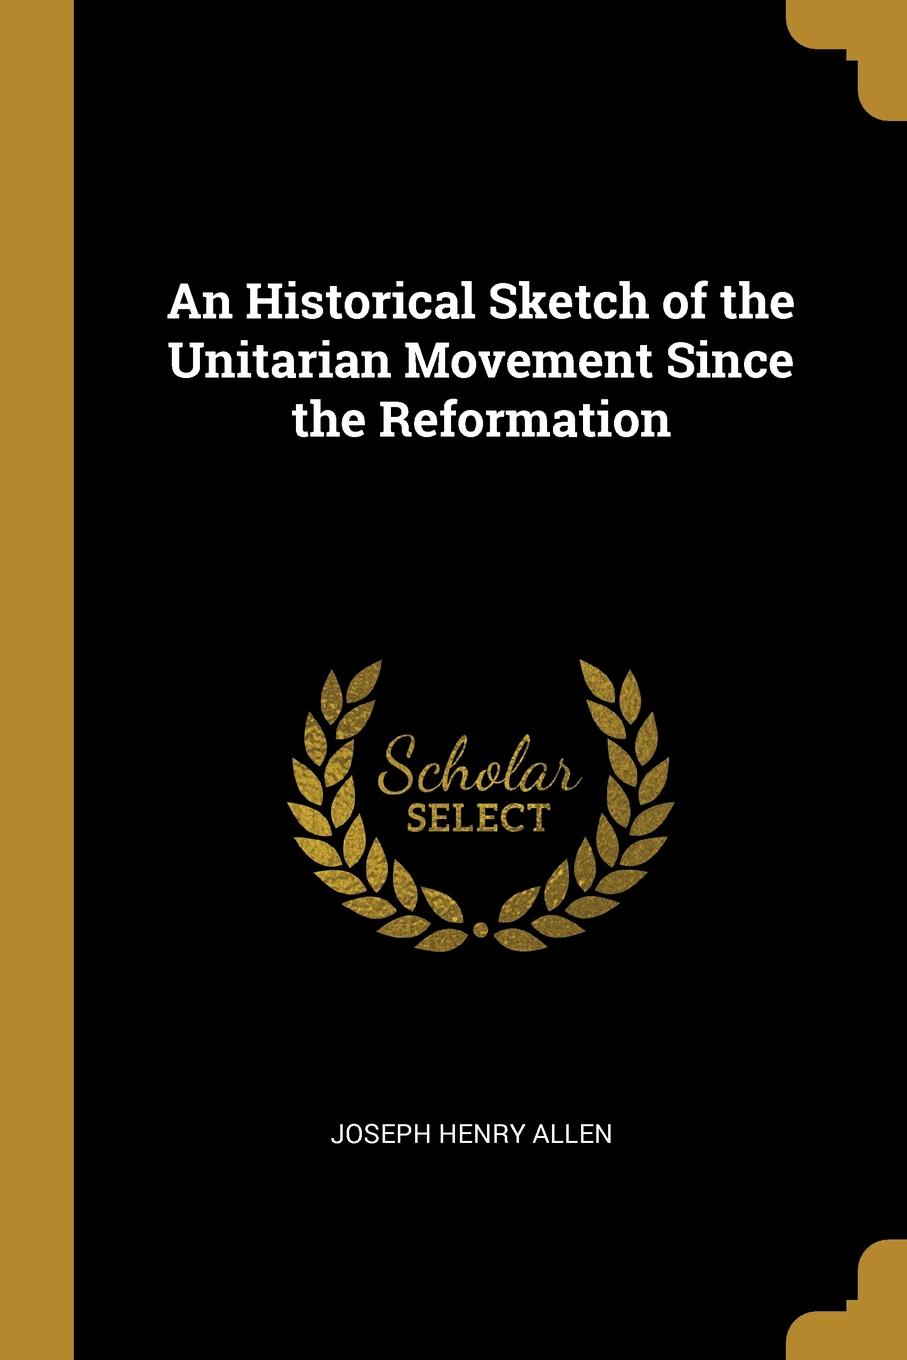 An Historical Sketch of the Unitarian Movement Since the Reformation